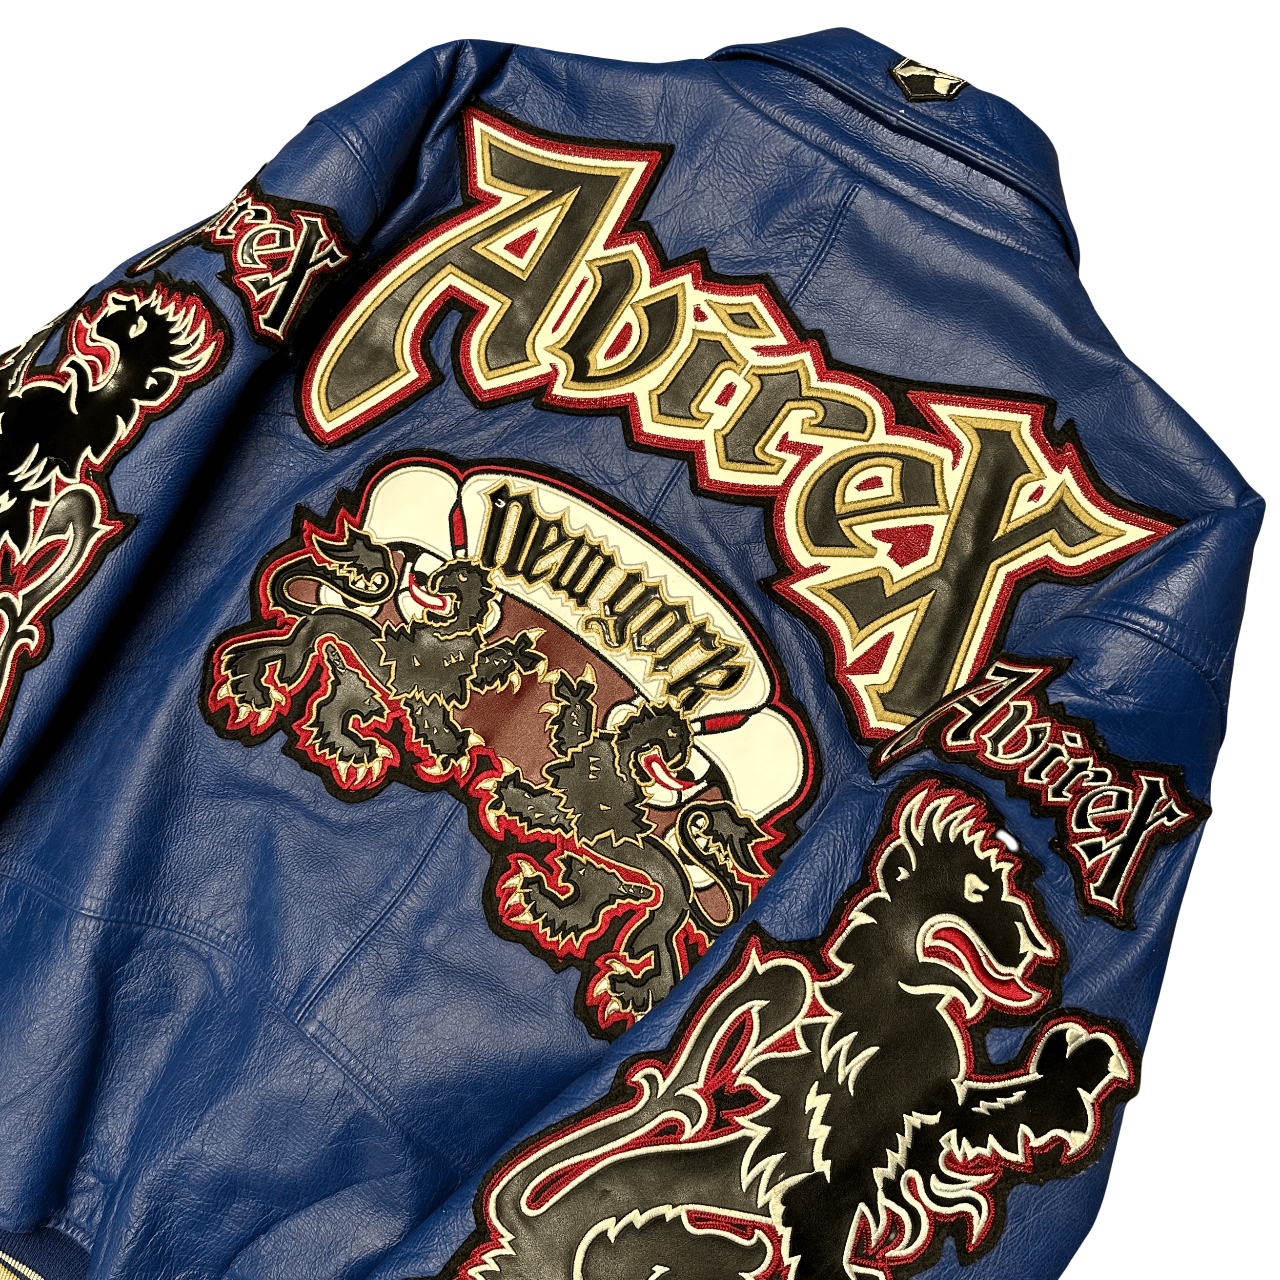 ARCHIVE Avirex New York Dragons Leather Jacket In Royal Blue ( XL ) - Known Source